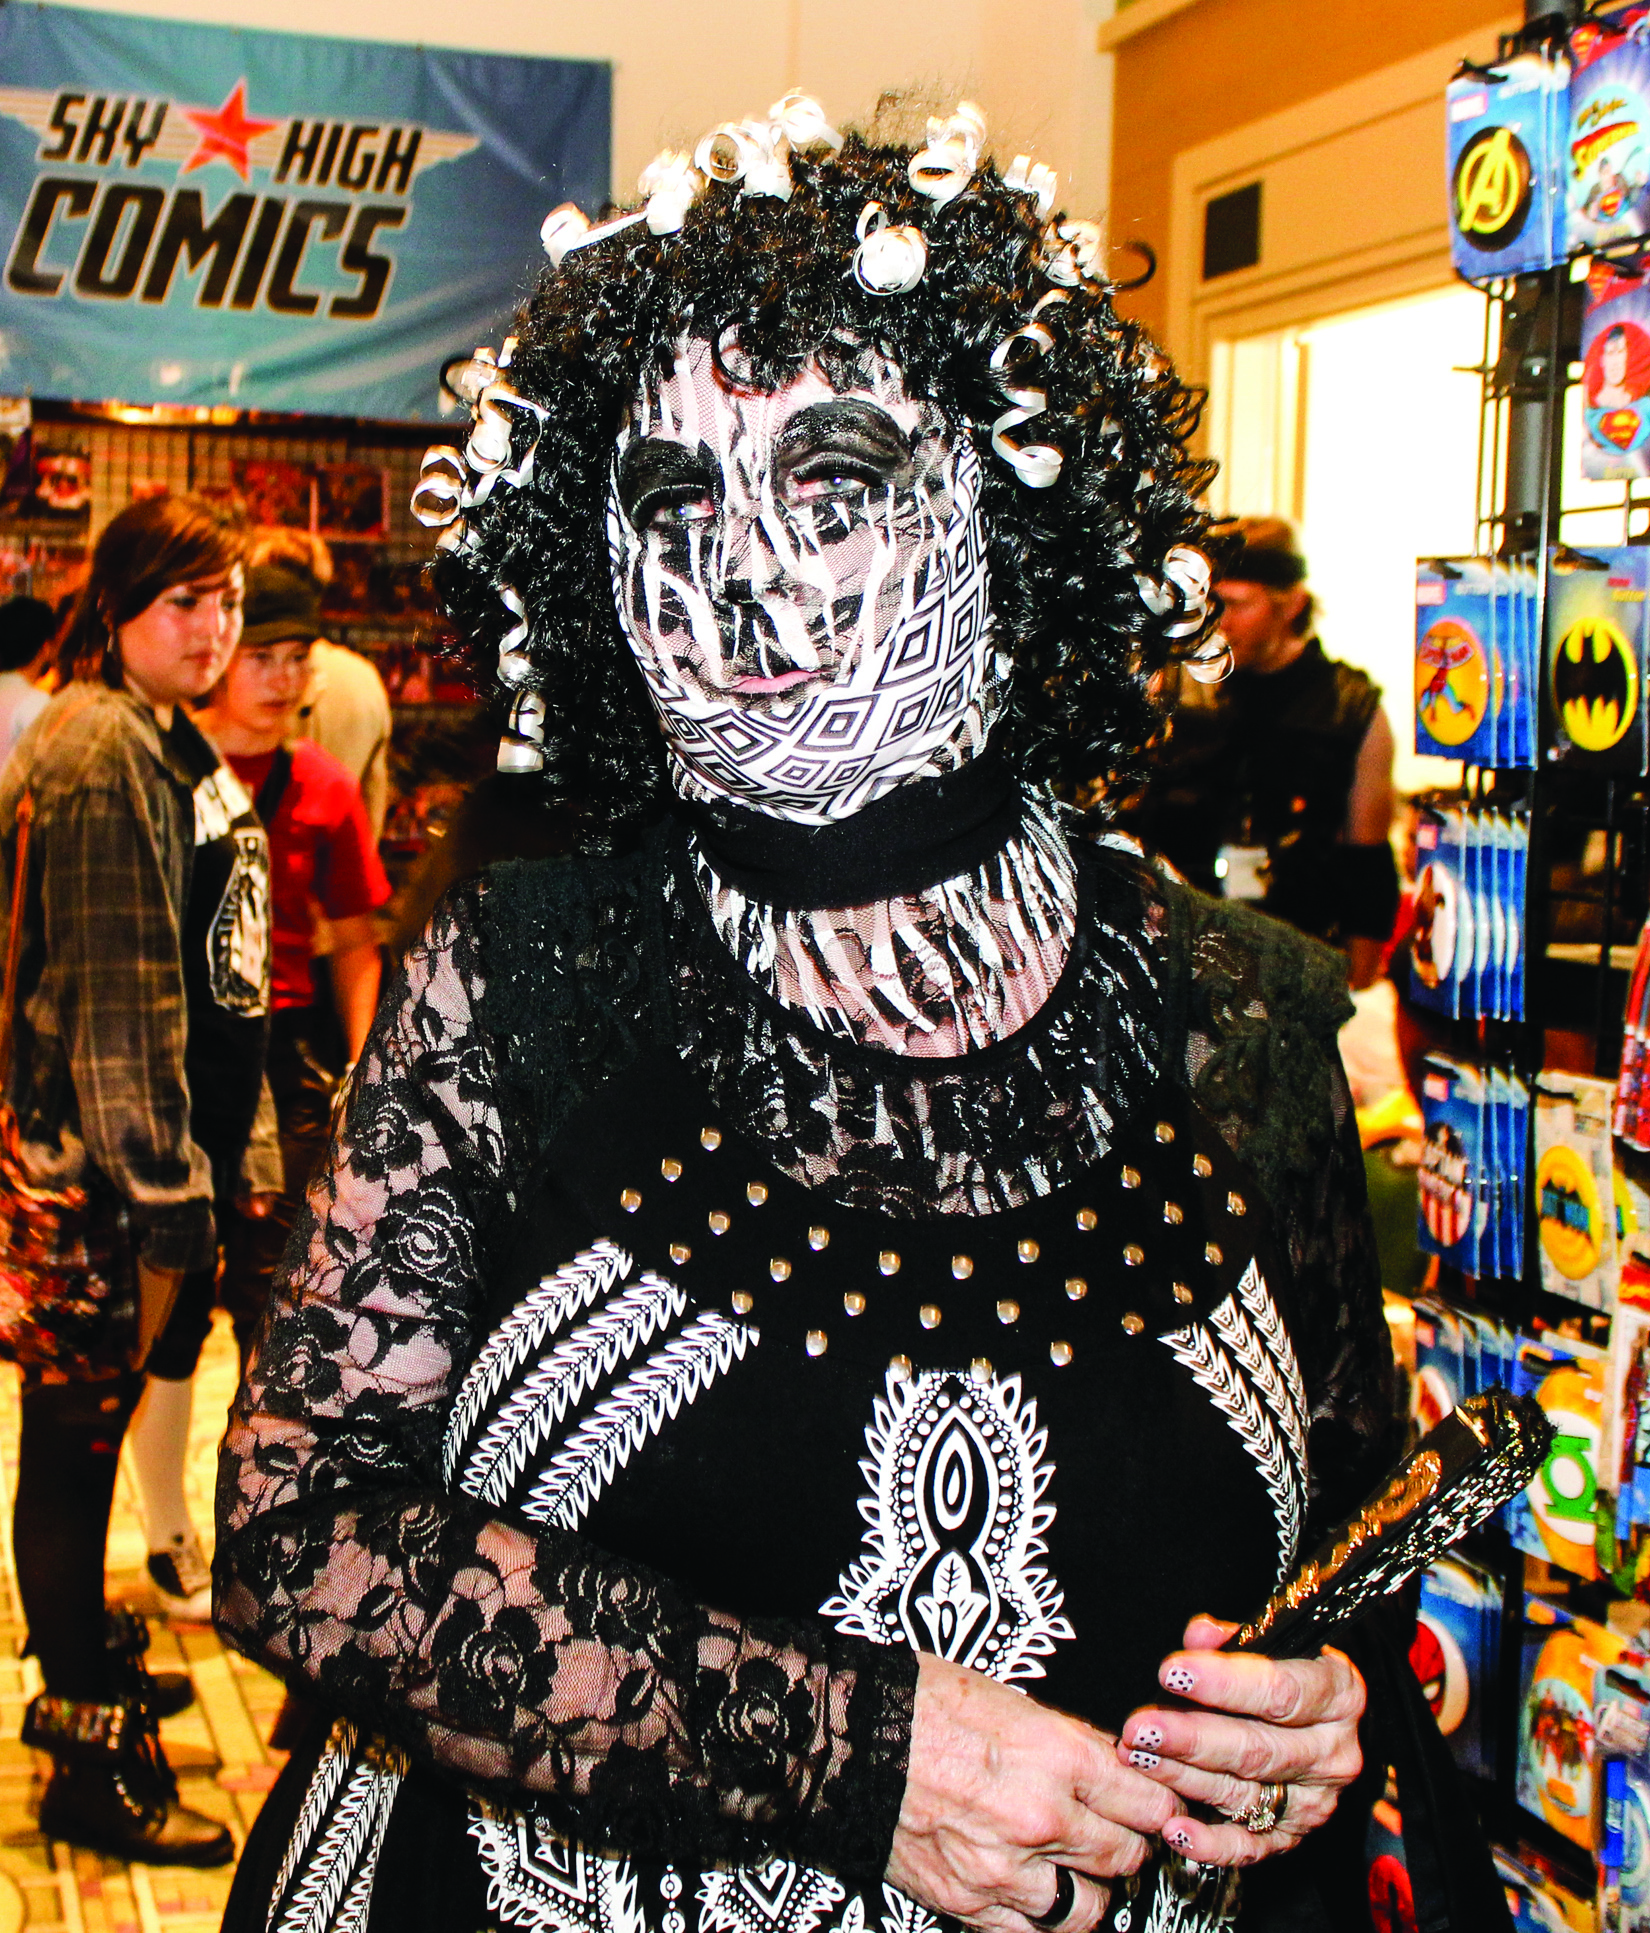 Darlene Rixey with the San Diego Costume Guild checks out the vendors at the Escondido Nerd Con 2015. (Hanadi Cackler/The Telescope)